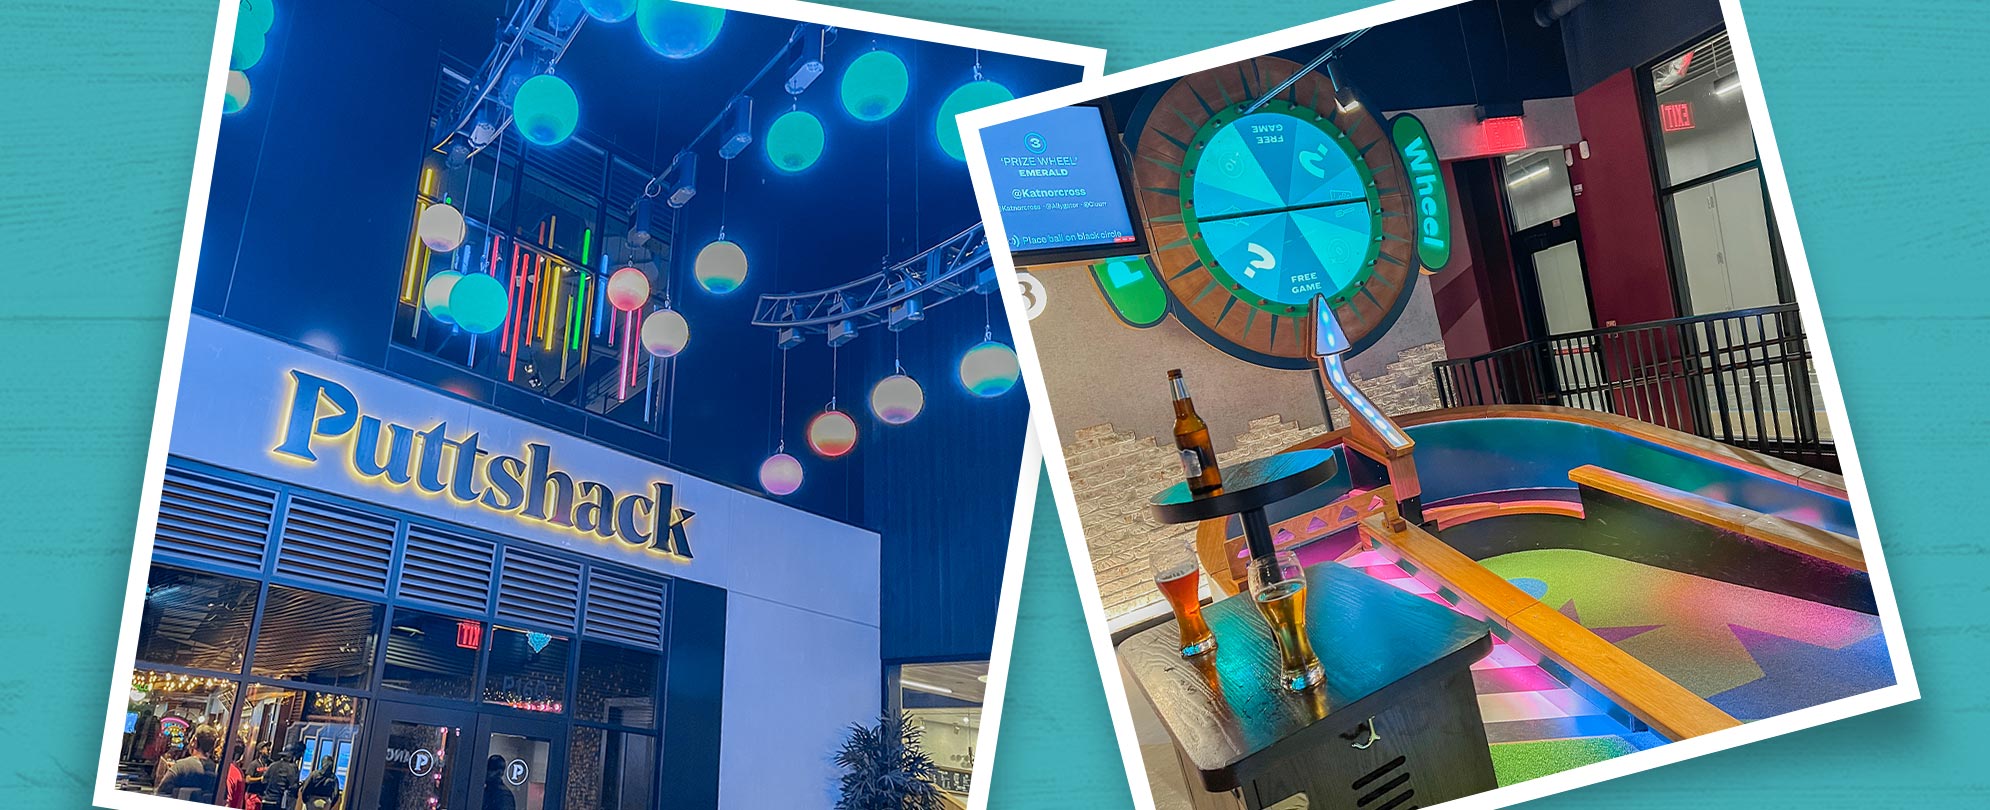 Two snapshots on a teal background showing the entrance and large sign for Puttshack and one of the colorful holes of the indoor miniature golf course.